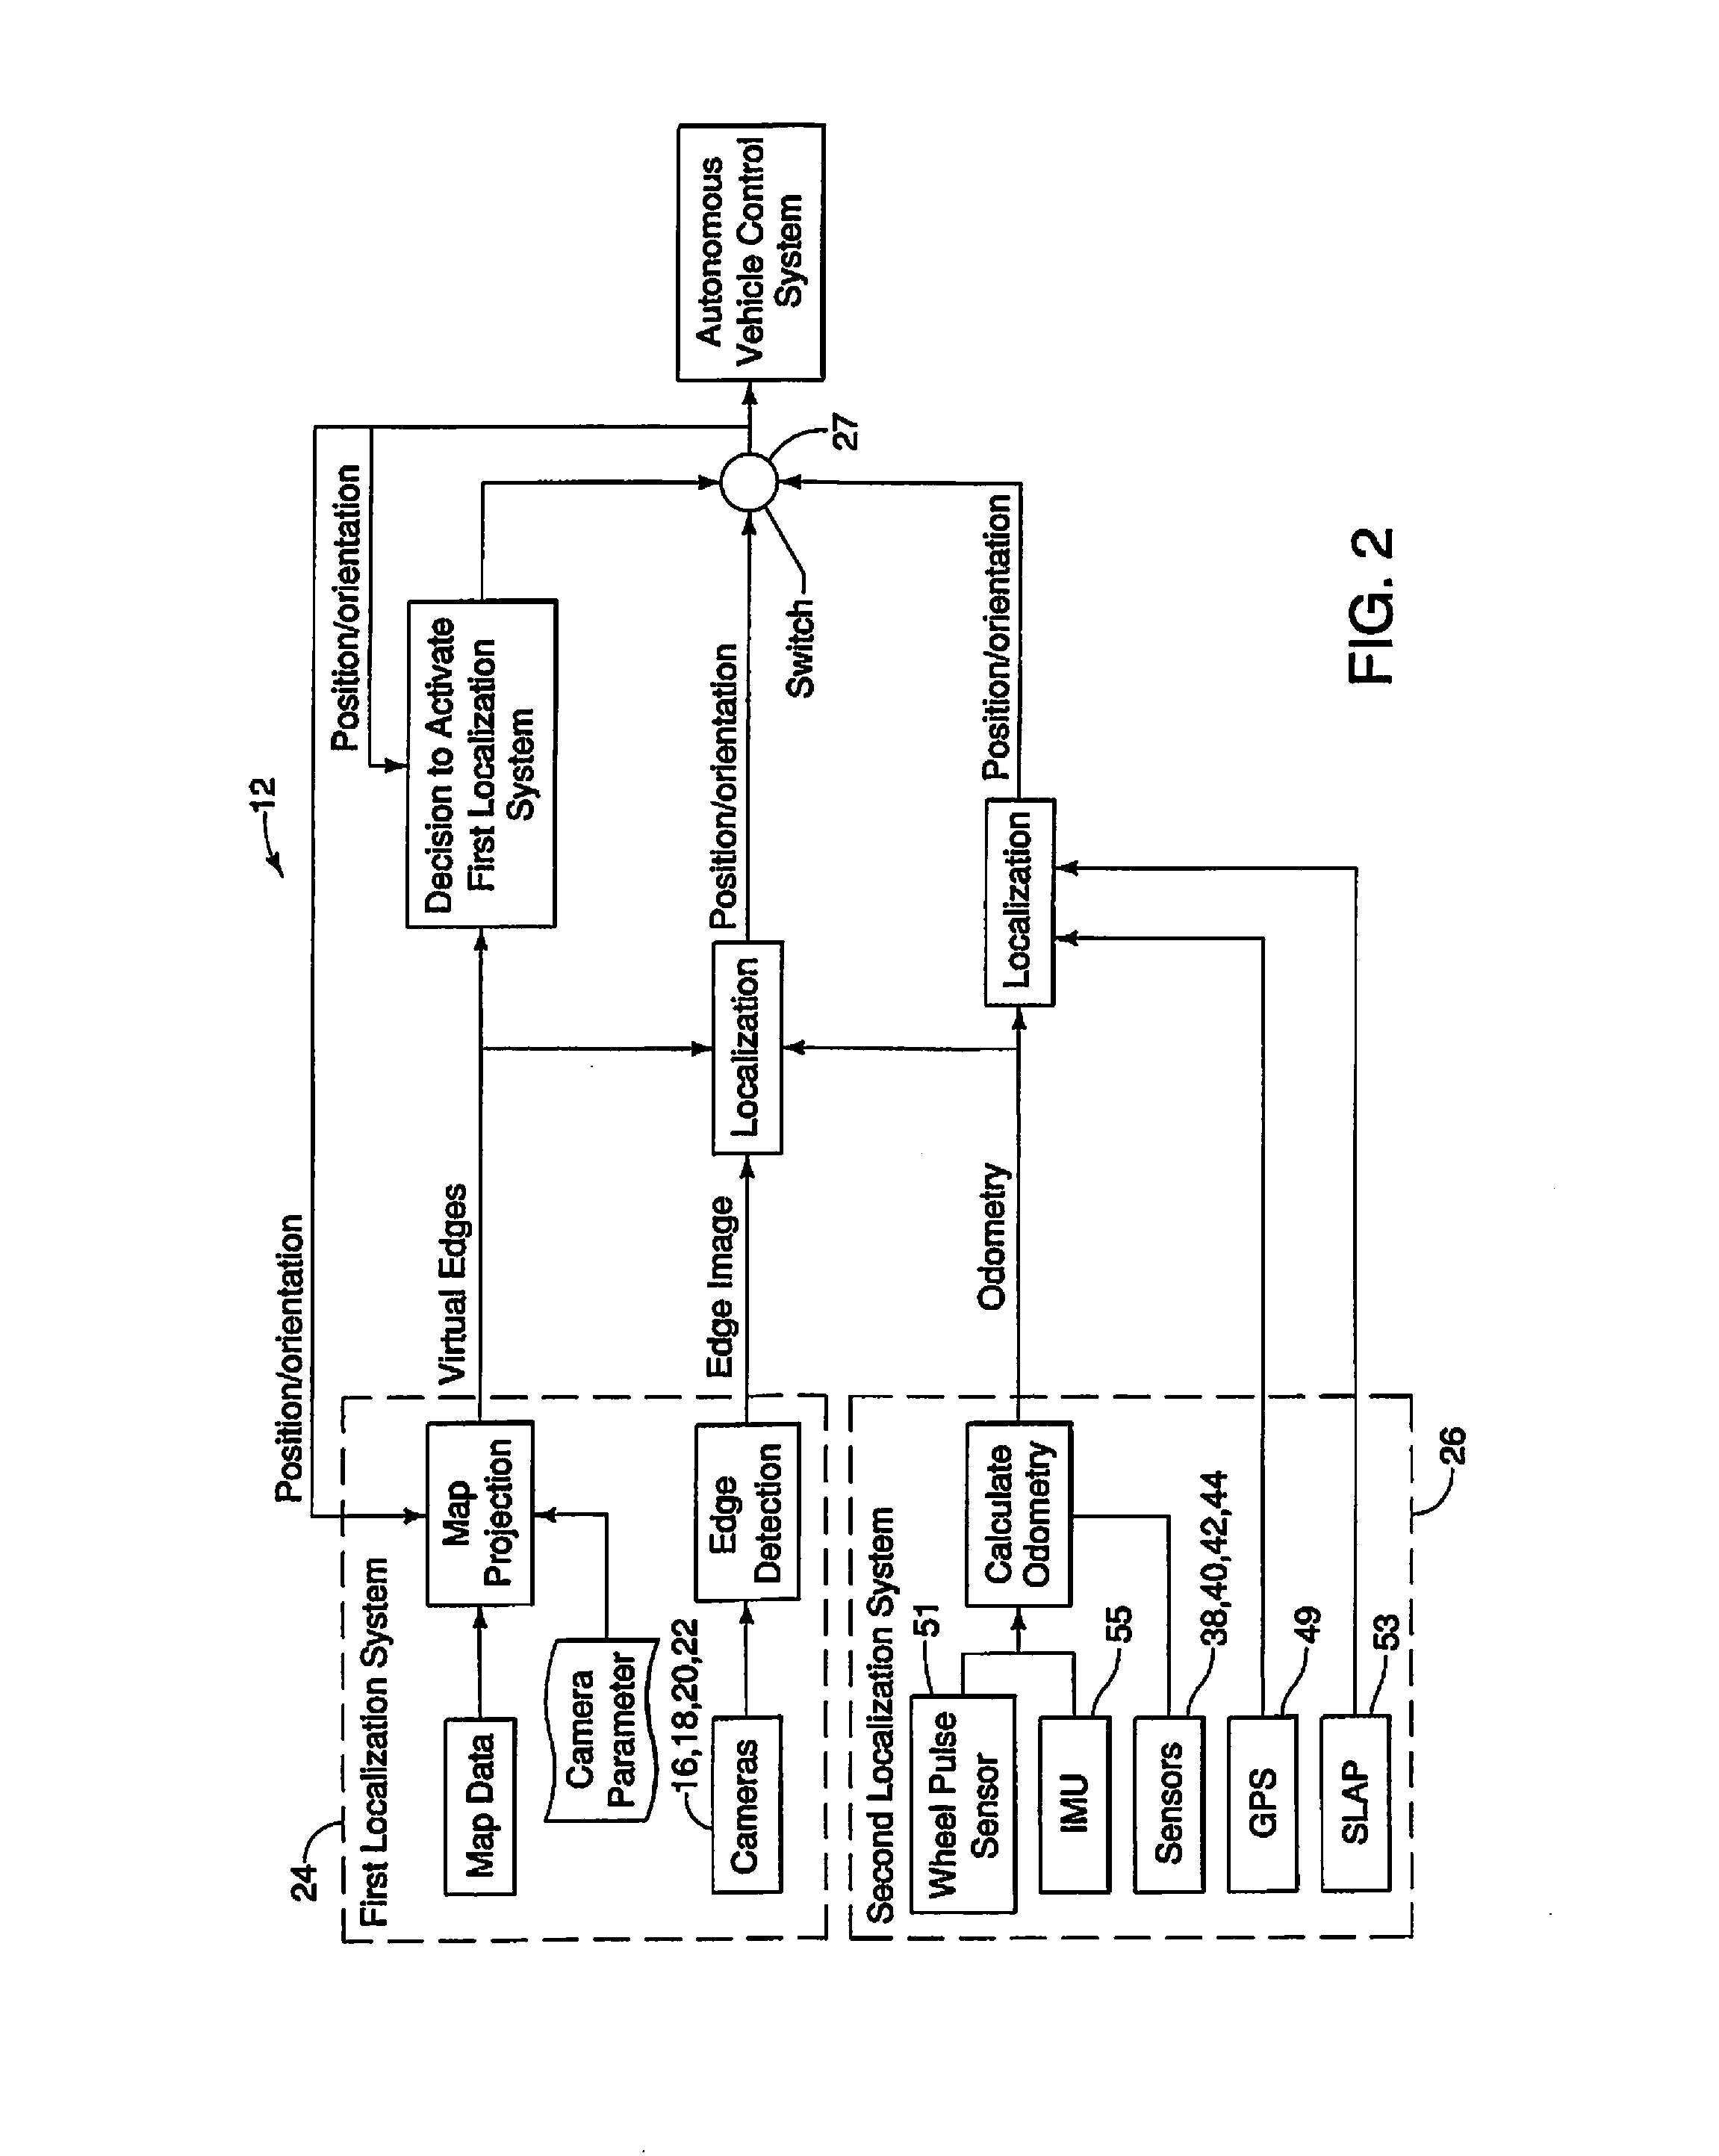 Vehicle localization system